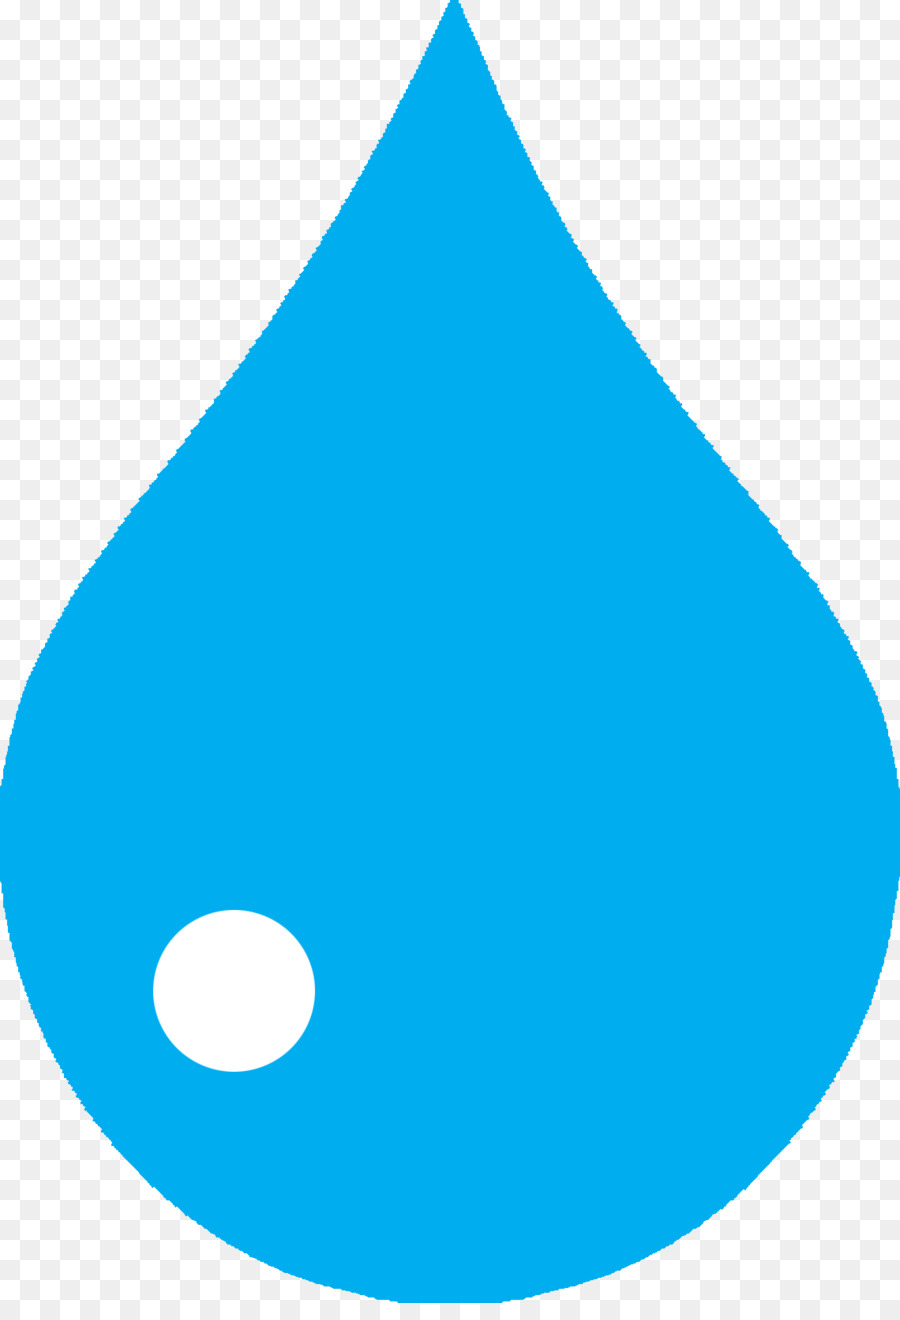 Drinking water Drop Business Clip art - drops png download - 1140*1651 - Free Transparent Drinking Water png Download.